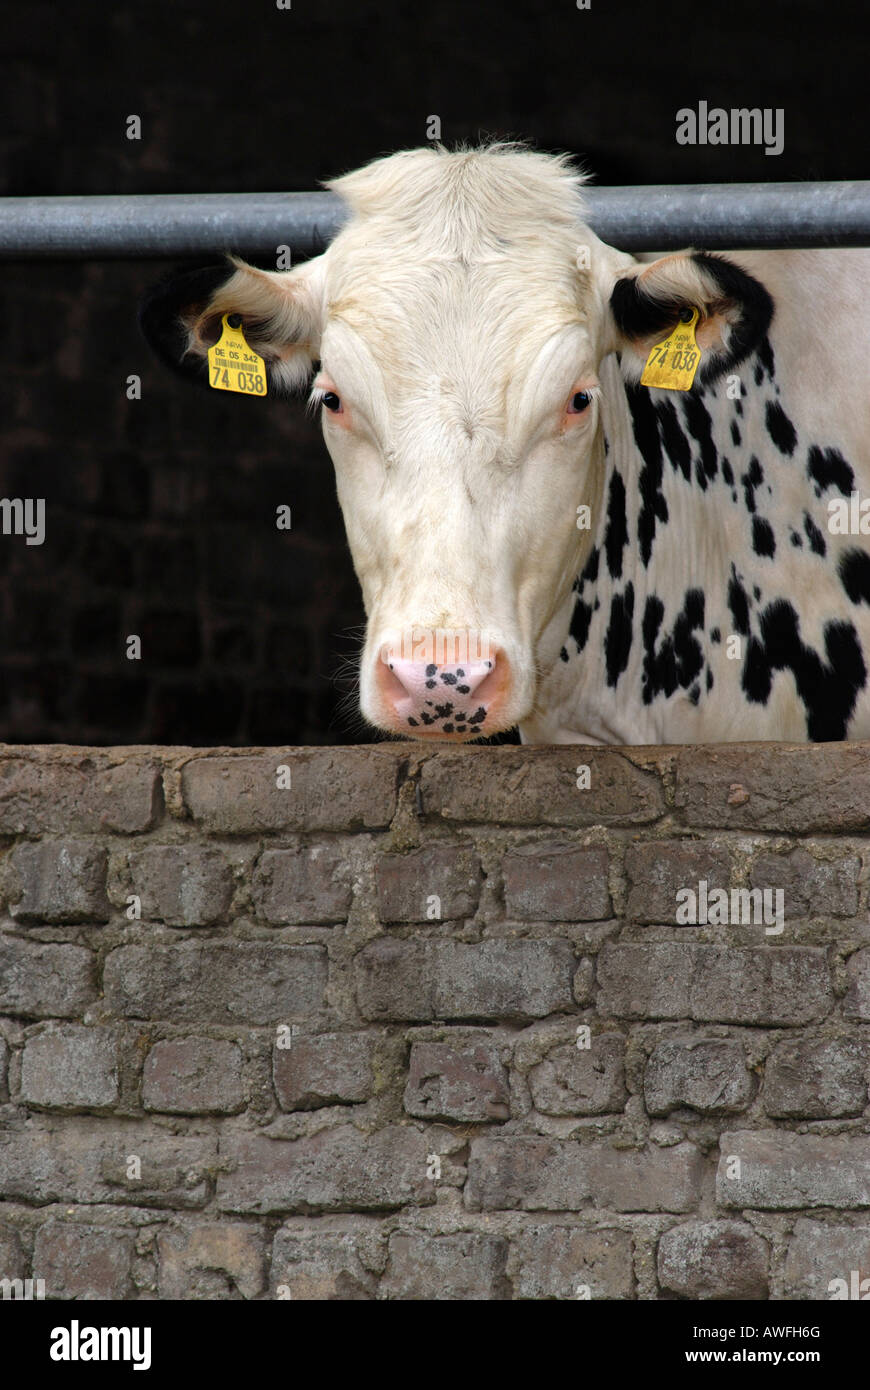 Black-and-white spotted cow (Bovinae) peering out of a barn in North Rhine-Westphalia, Germany, Europe Stock Photo